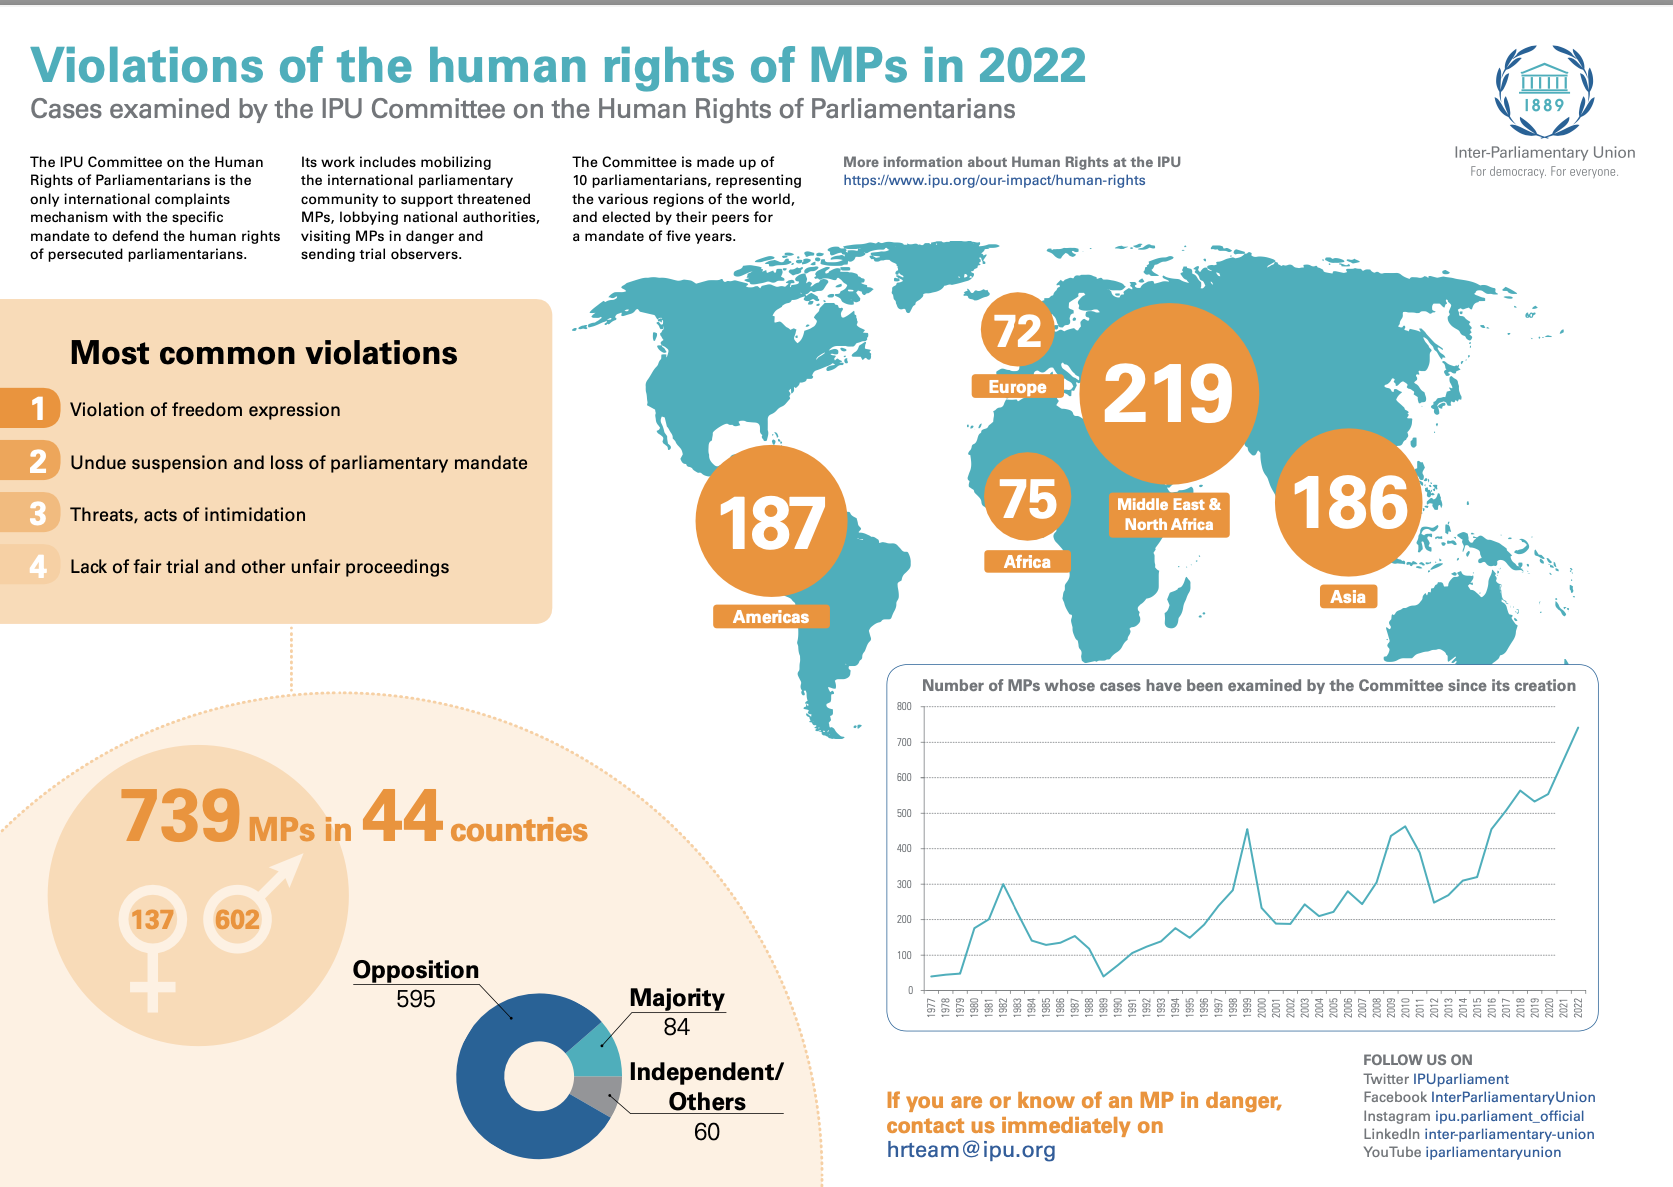 Violations of the human rights of MPs – 2022